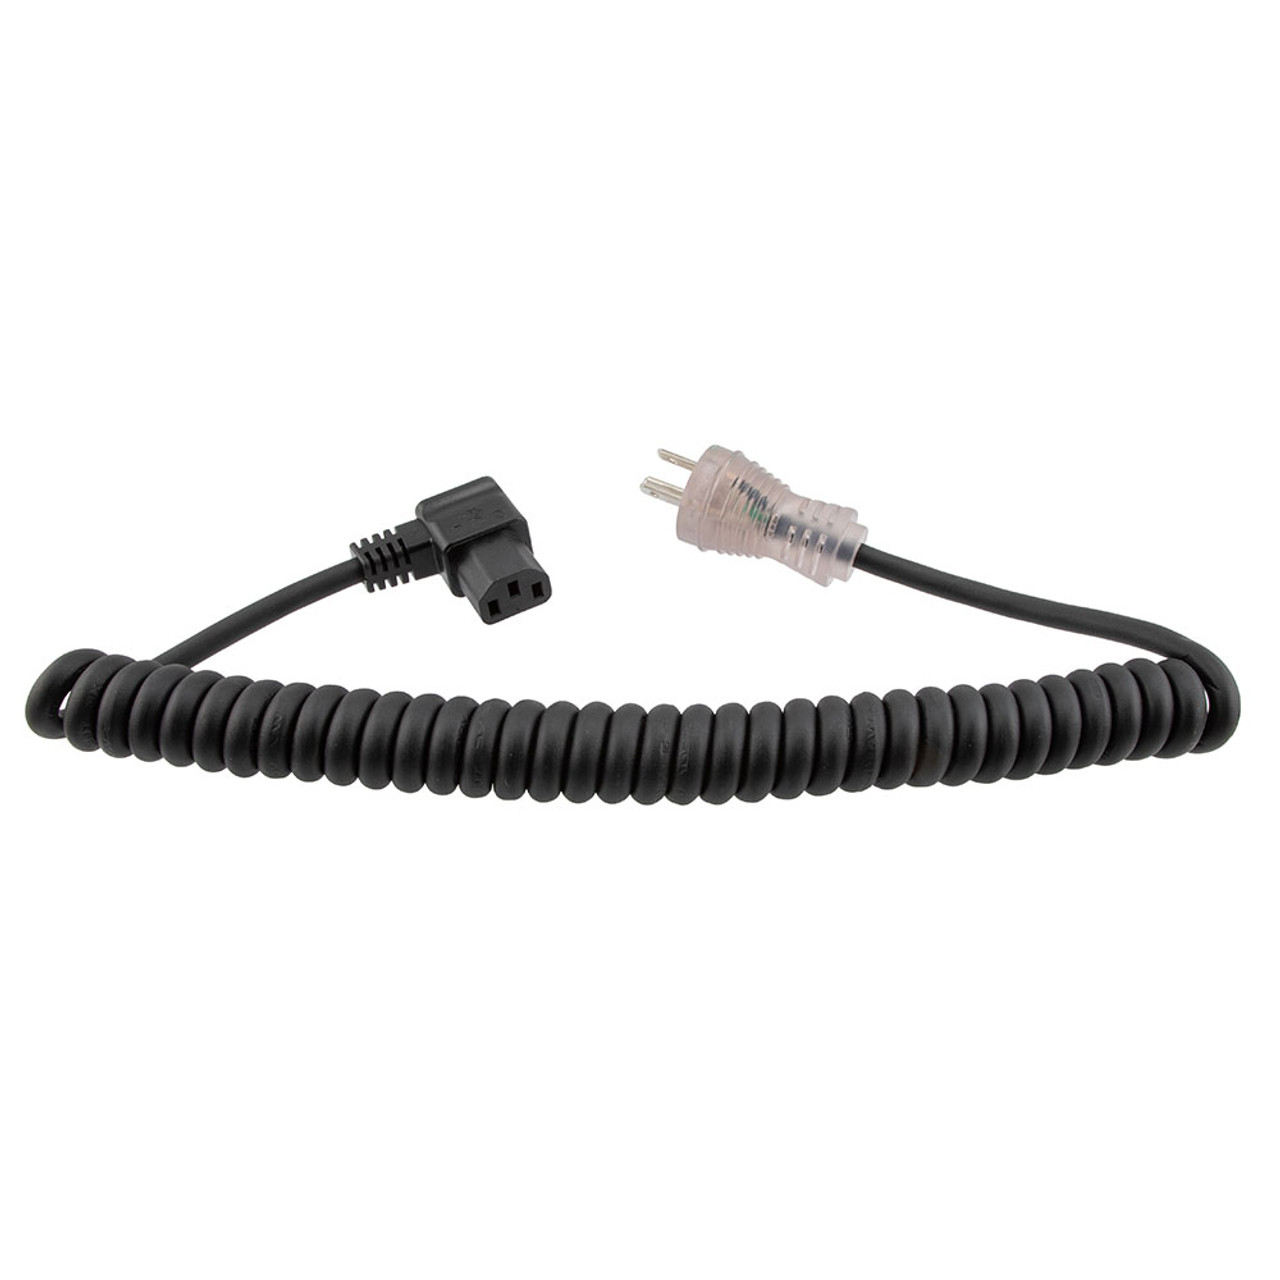 Hospital Grade NEMA 5-15 With LED to Right Angle C13 Coiled Power Cord 18 AWG TPE Jacket, 1 Foot Compressed Length